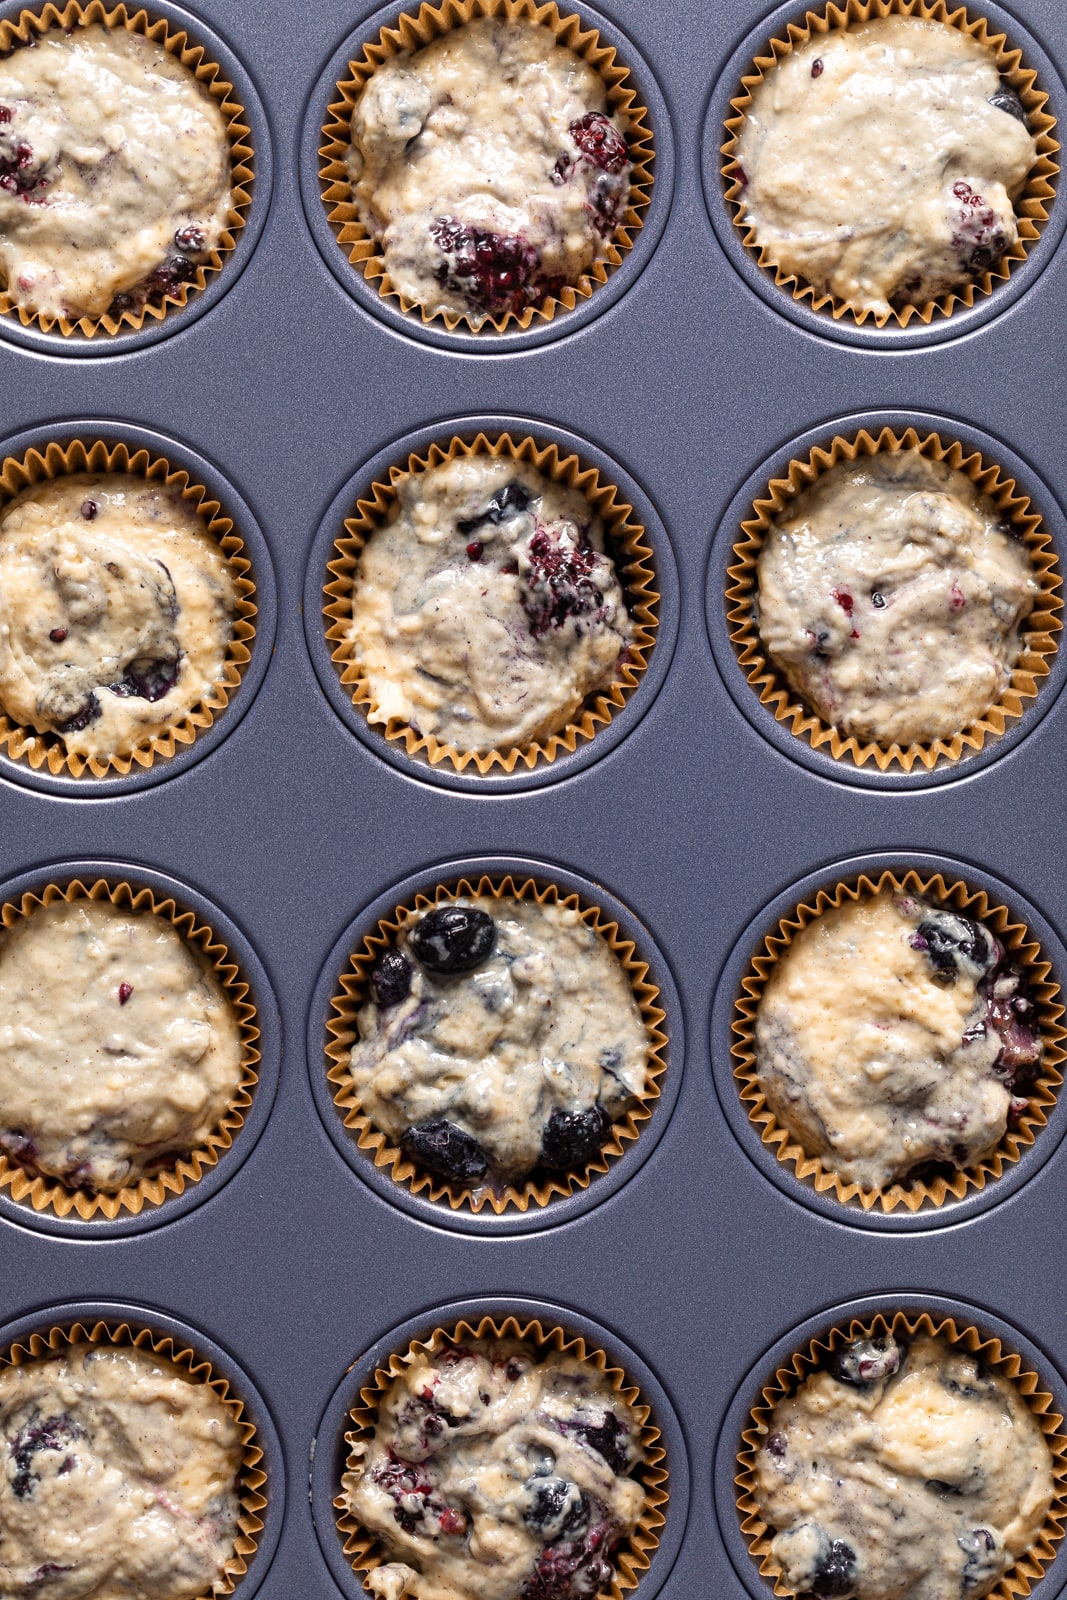 Muffin pan filled with Blueberry Blackberry Jam Muffin batter